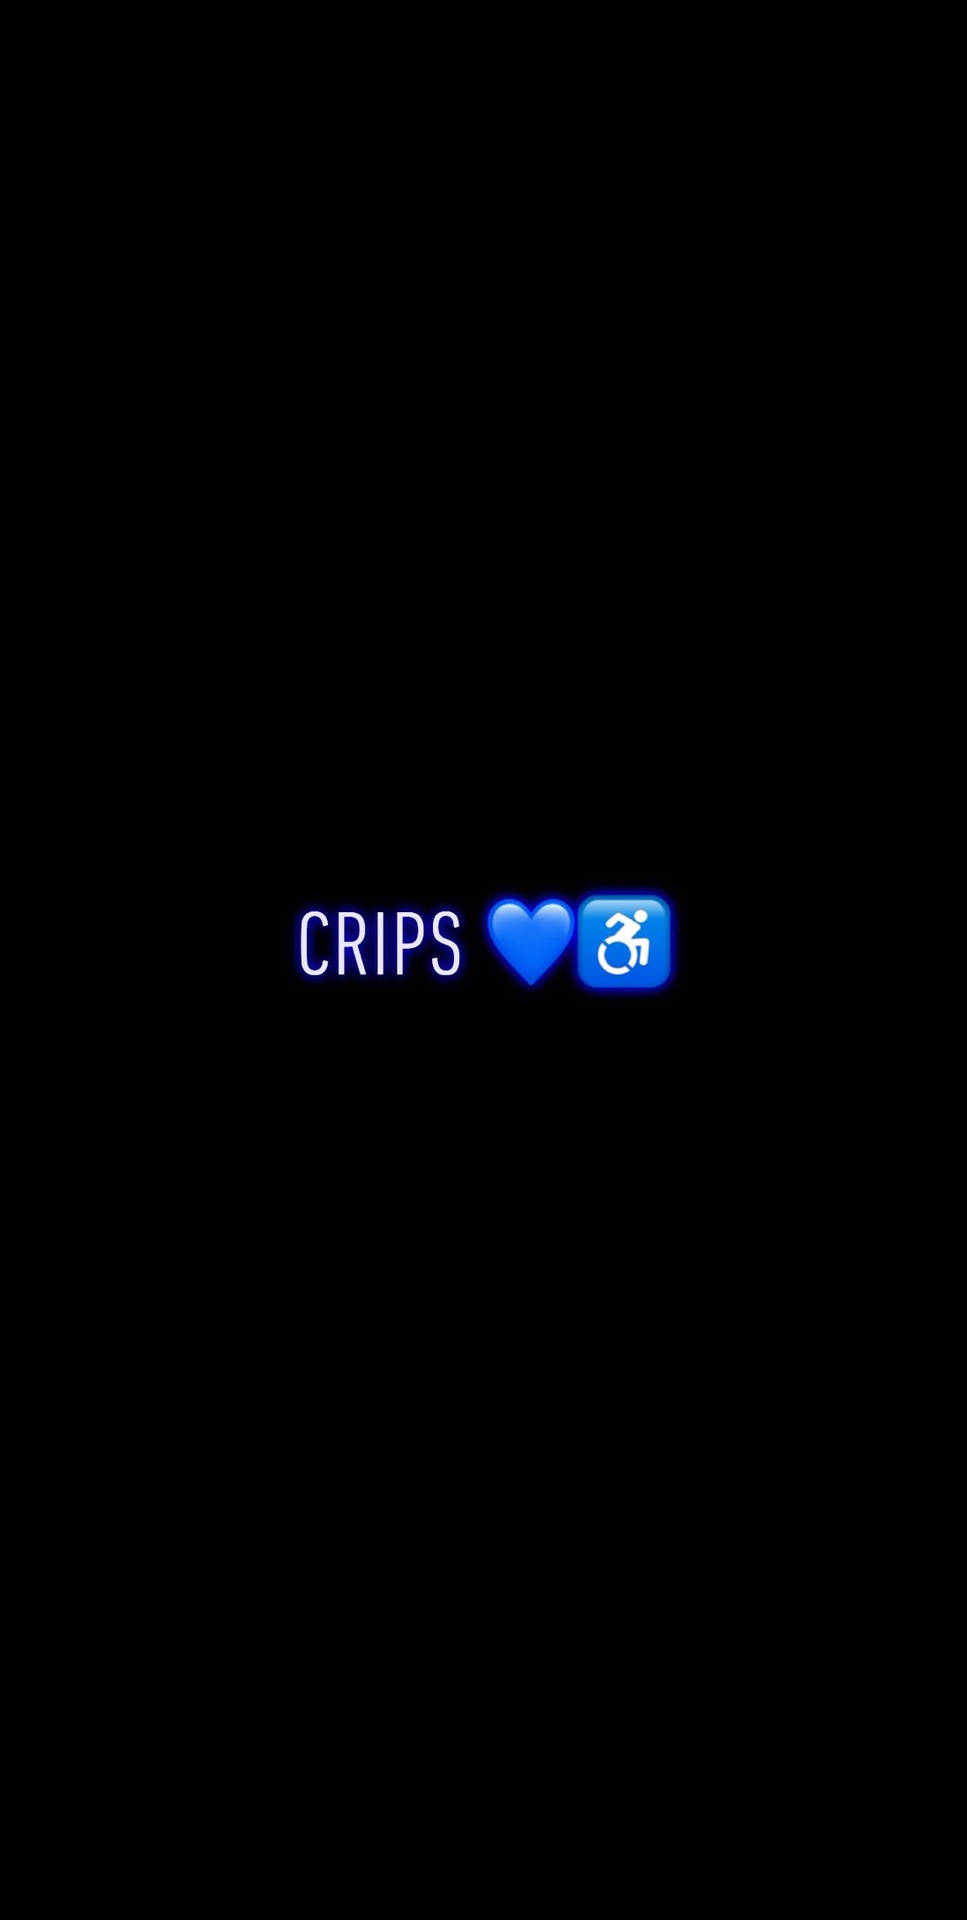 Crip 1112X2208 Wallpaper and Background Image